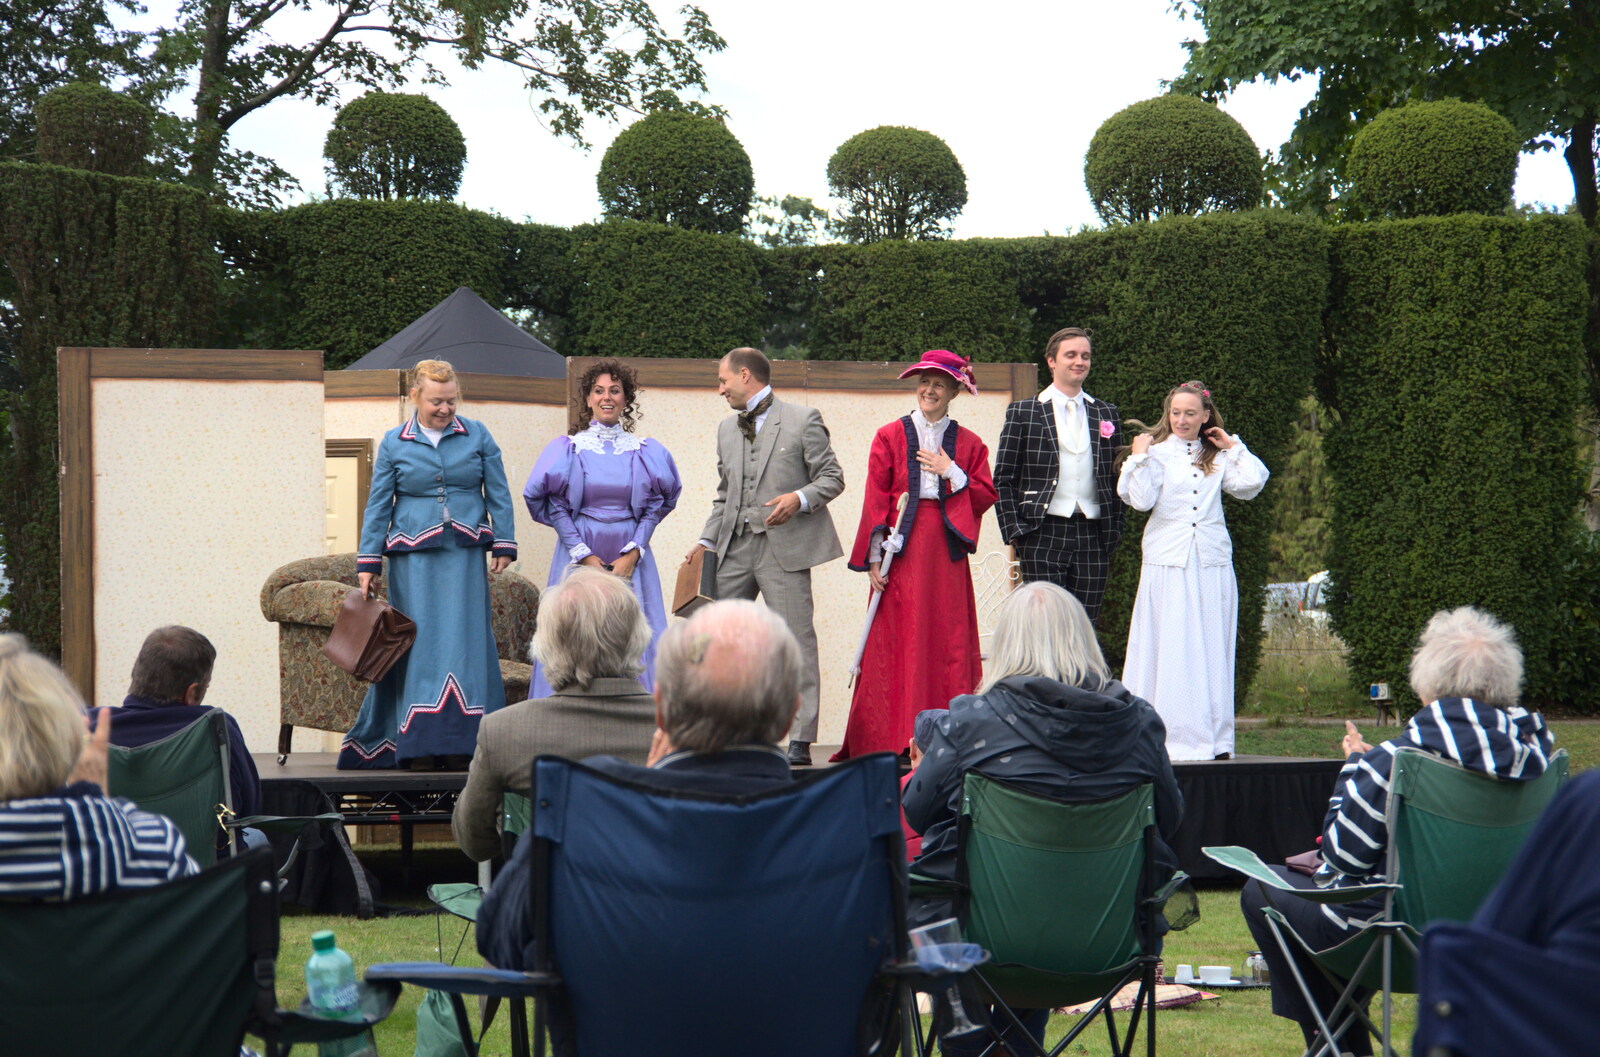 Camping at Three Rivers, Geldeston, Norfolk - 5th September 2020: The players take a bow